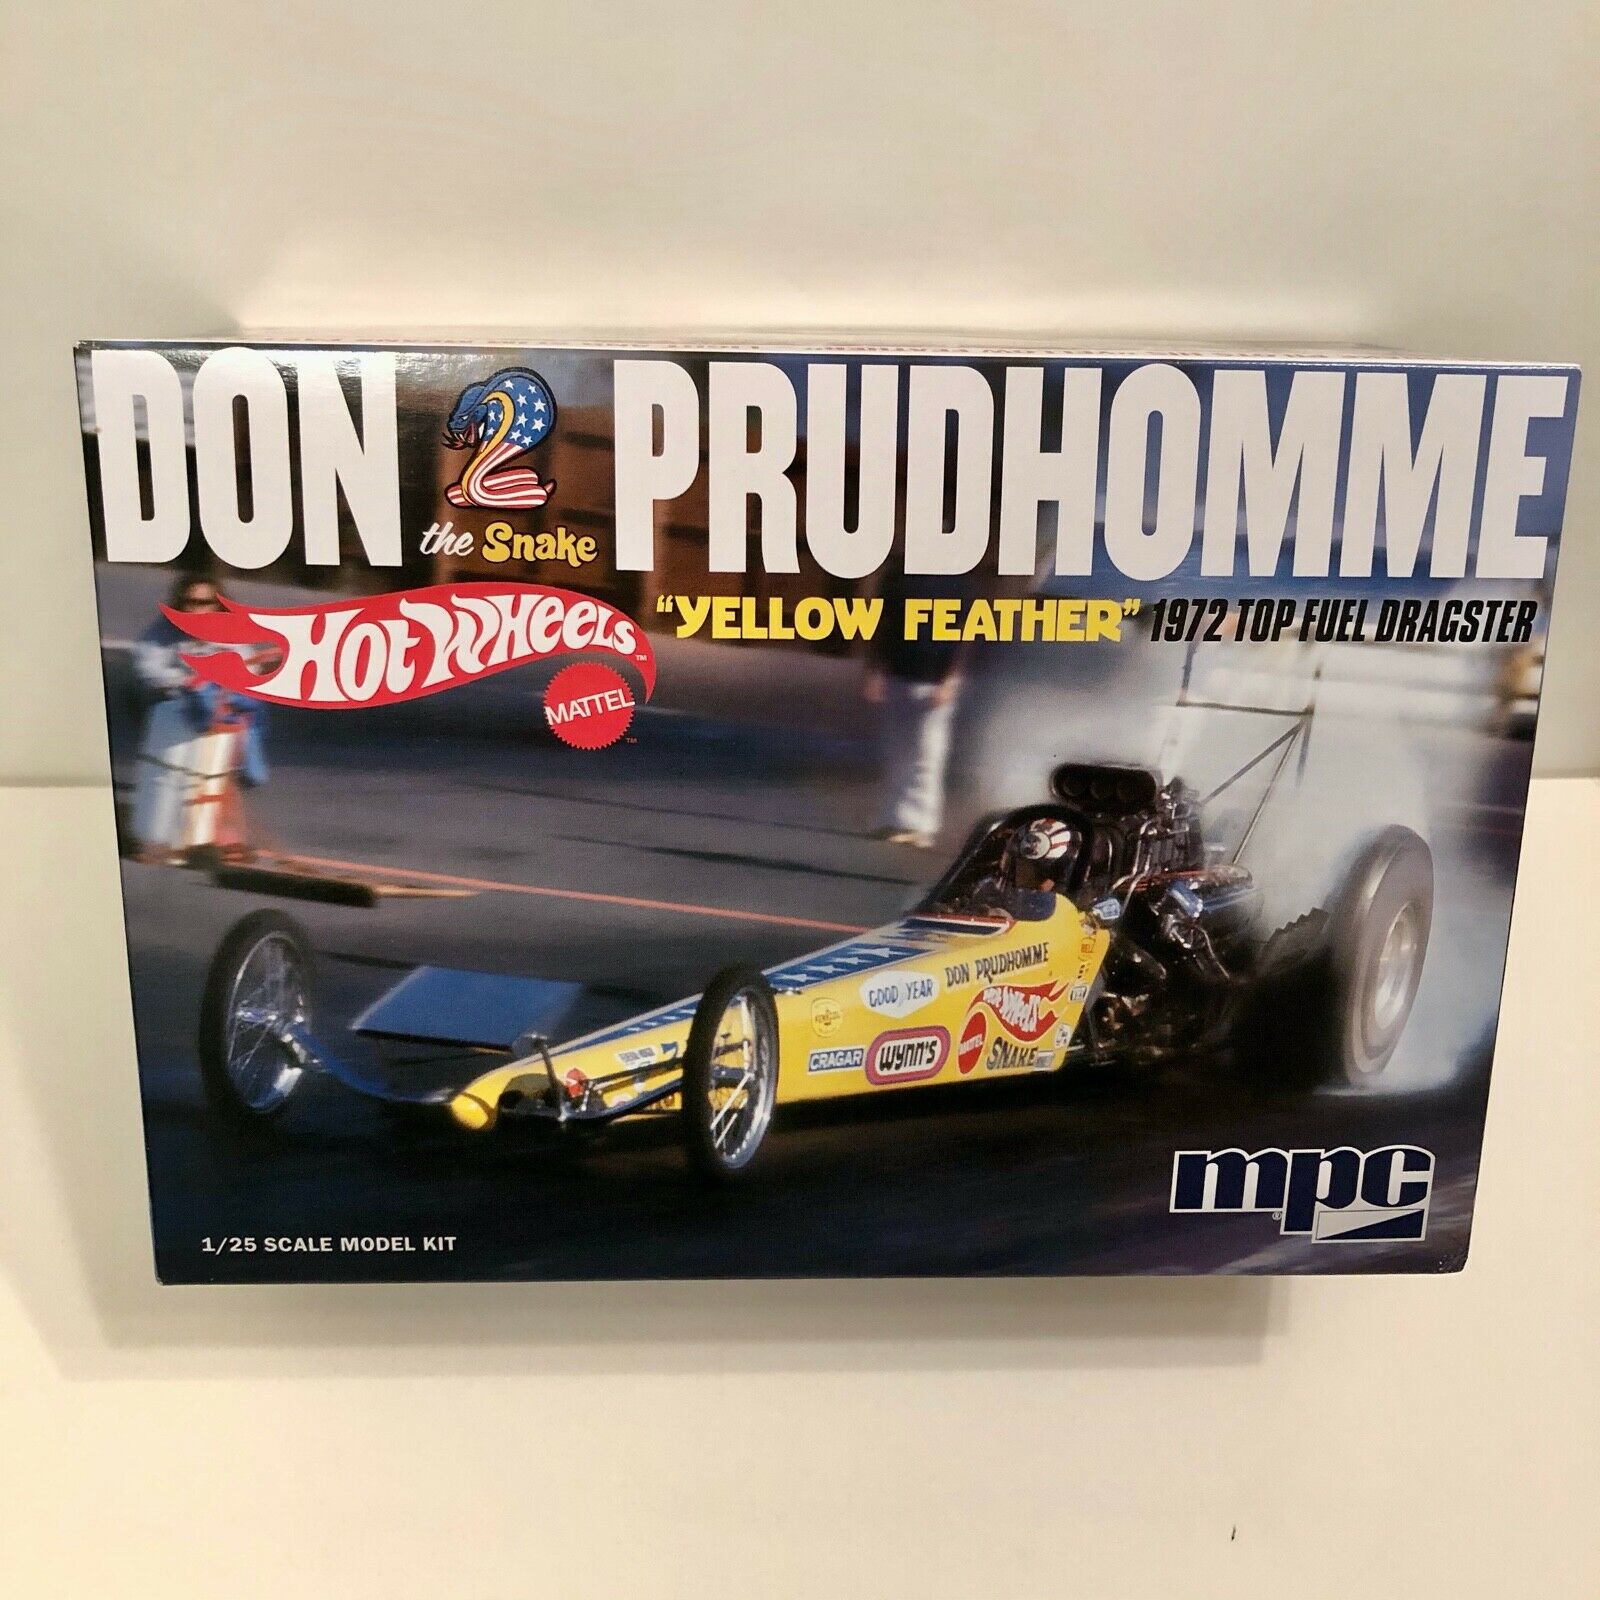 Mpc 1:25 Don Prudhomme "yellow Feather" 1972 Top Fuel Dragster Model Kit #mpc844